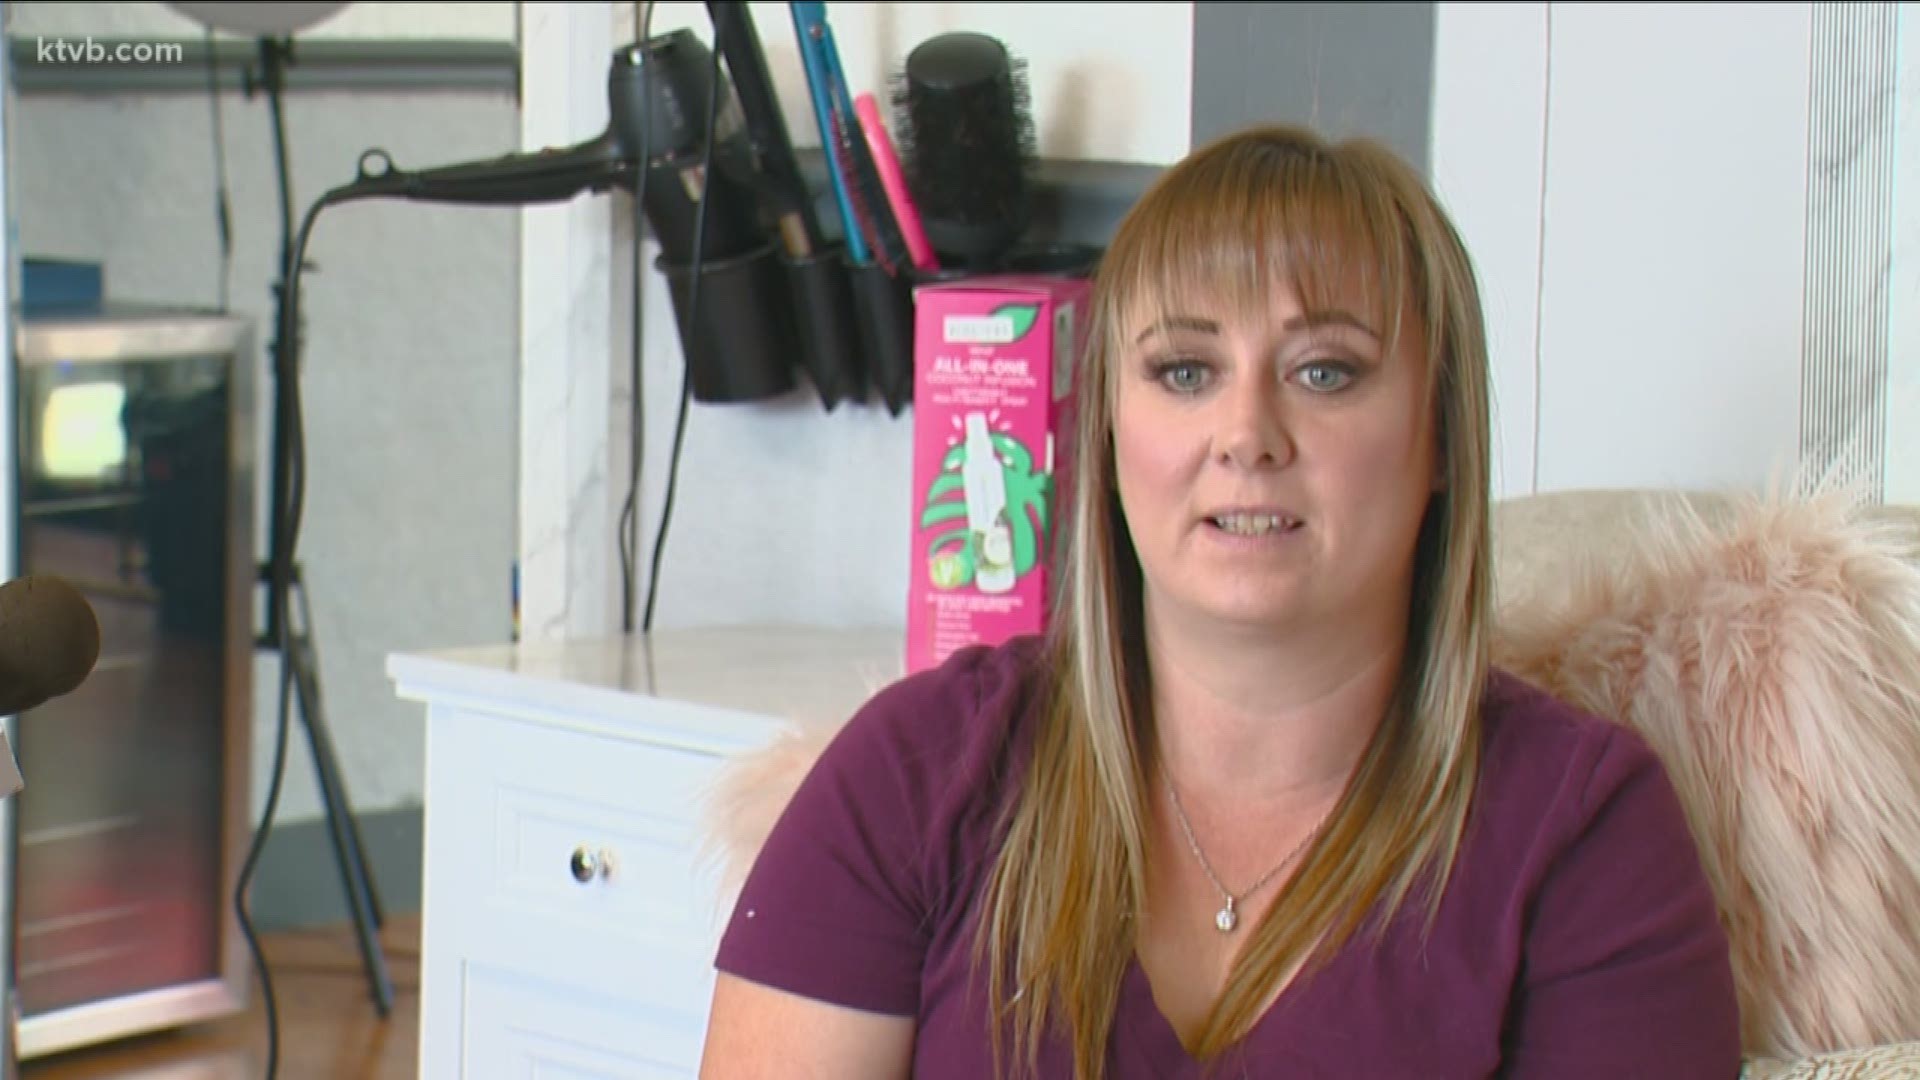 Wendy Boyer filed for unemployment nearly three months ago, but she has not received anything yet.